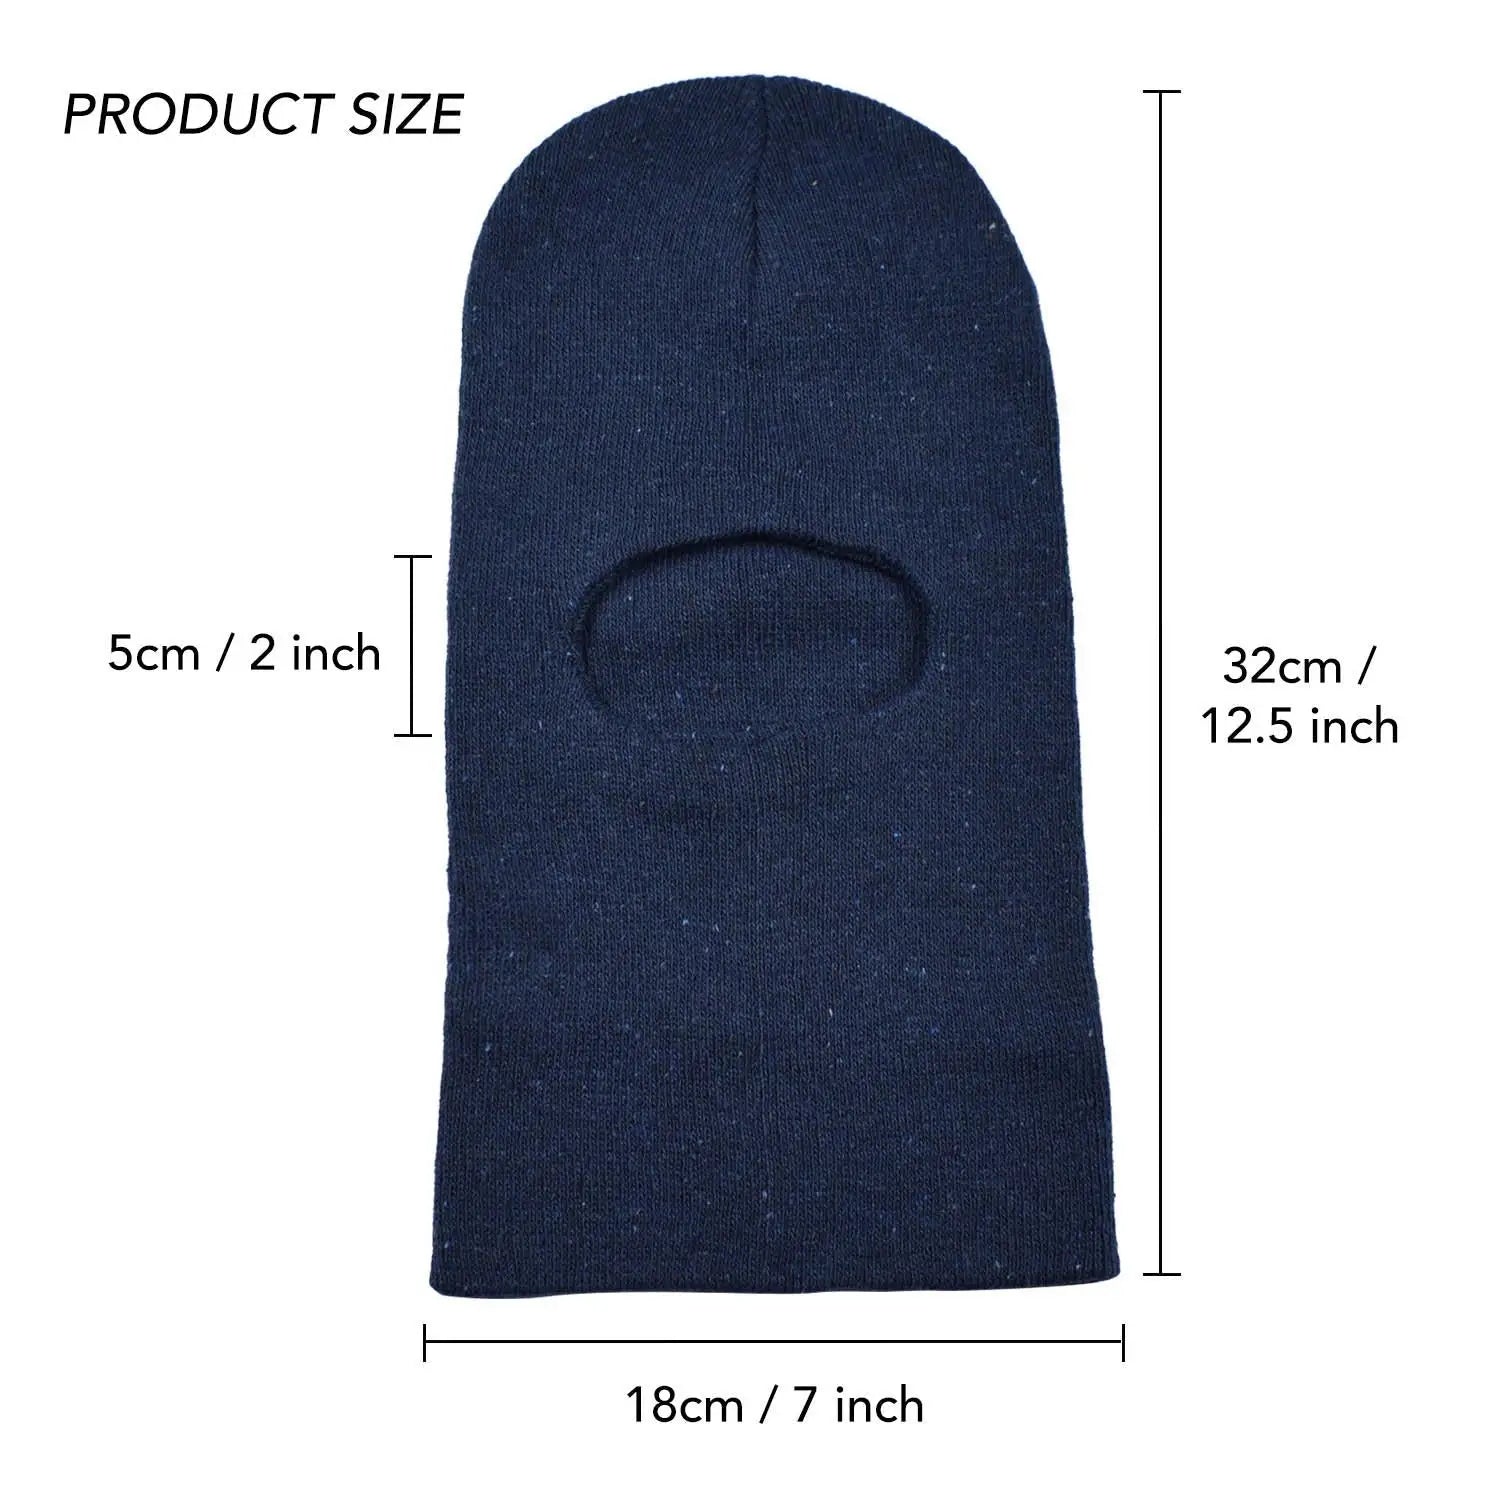 Multifunctional Cotton Blend Balaclava Hat with Face Cover